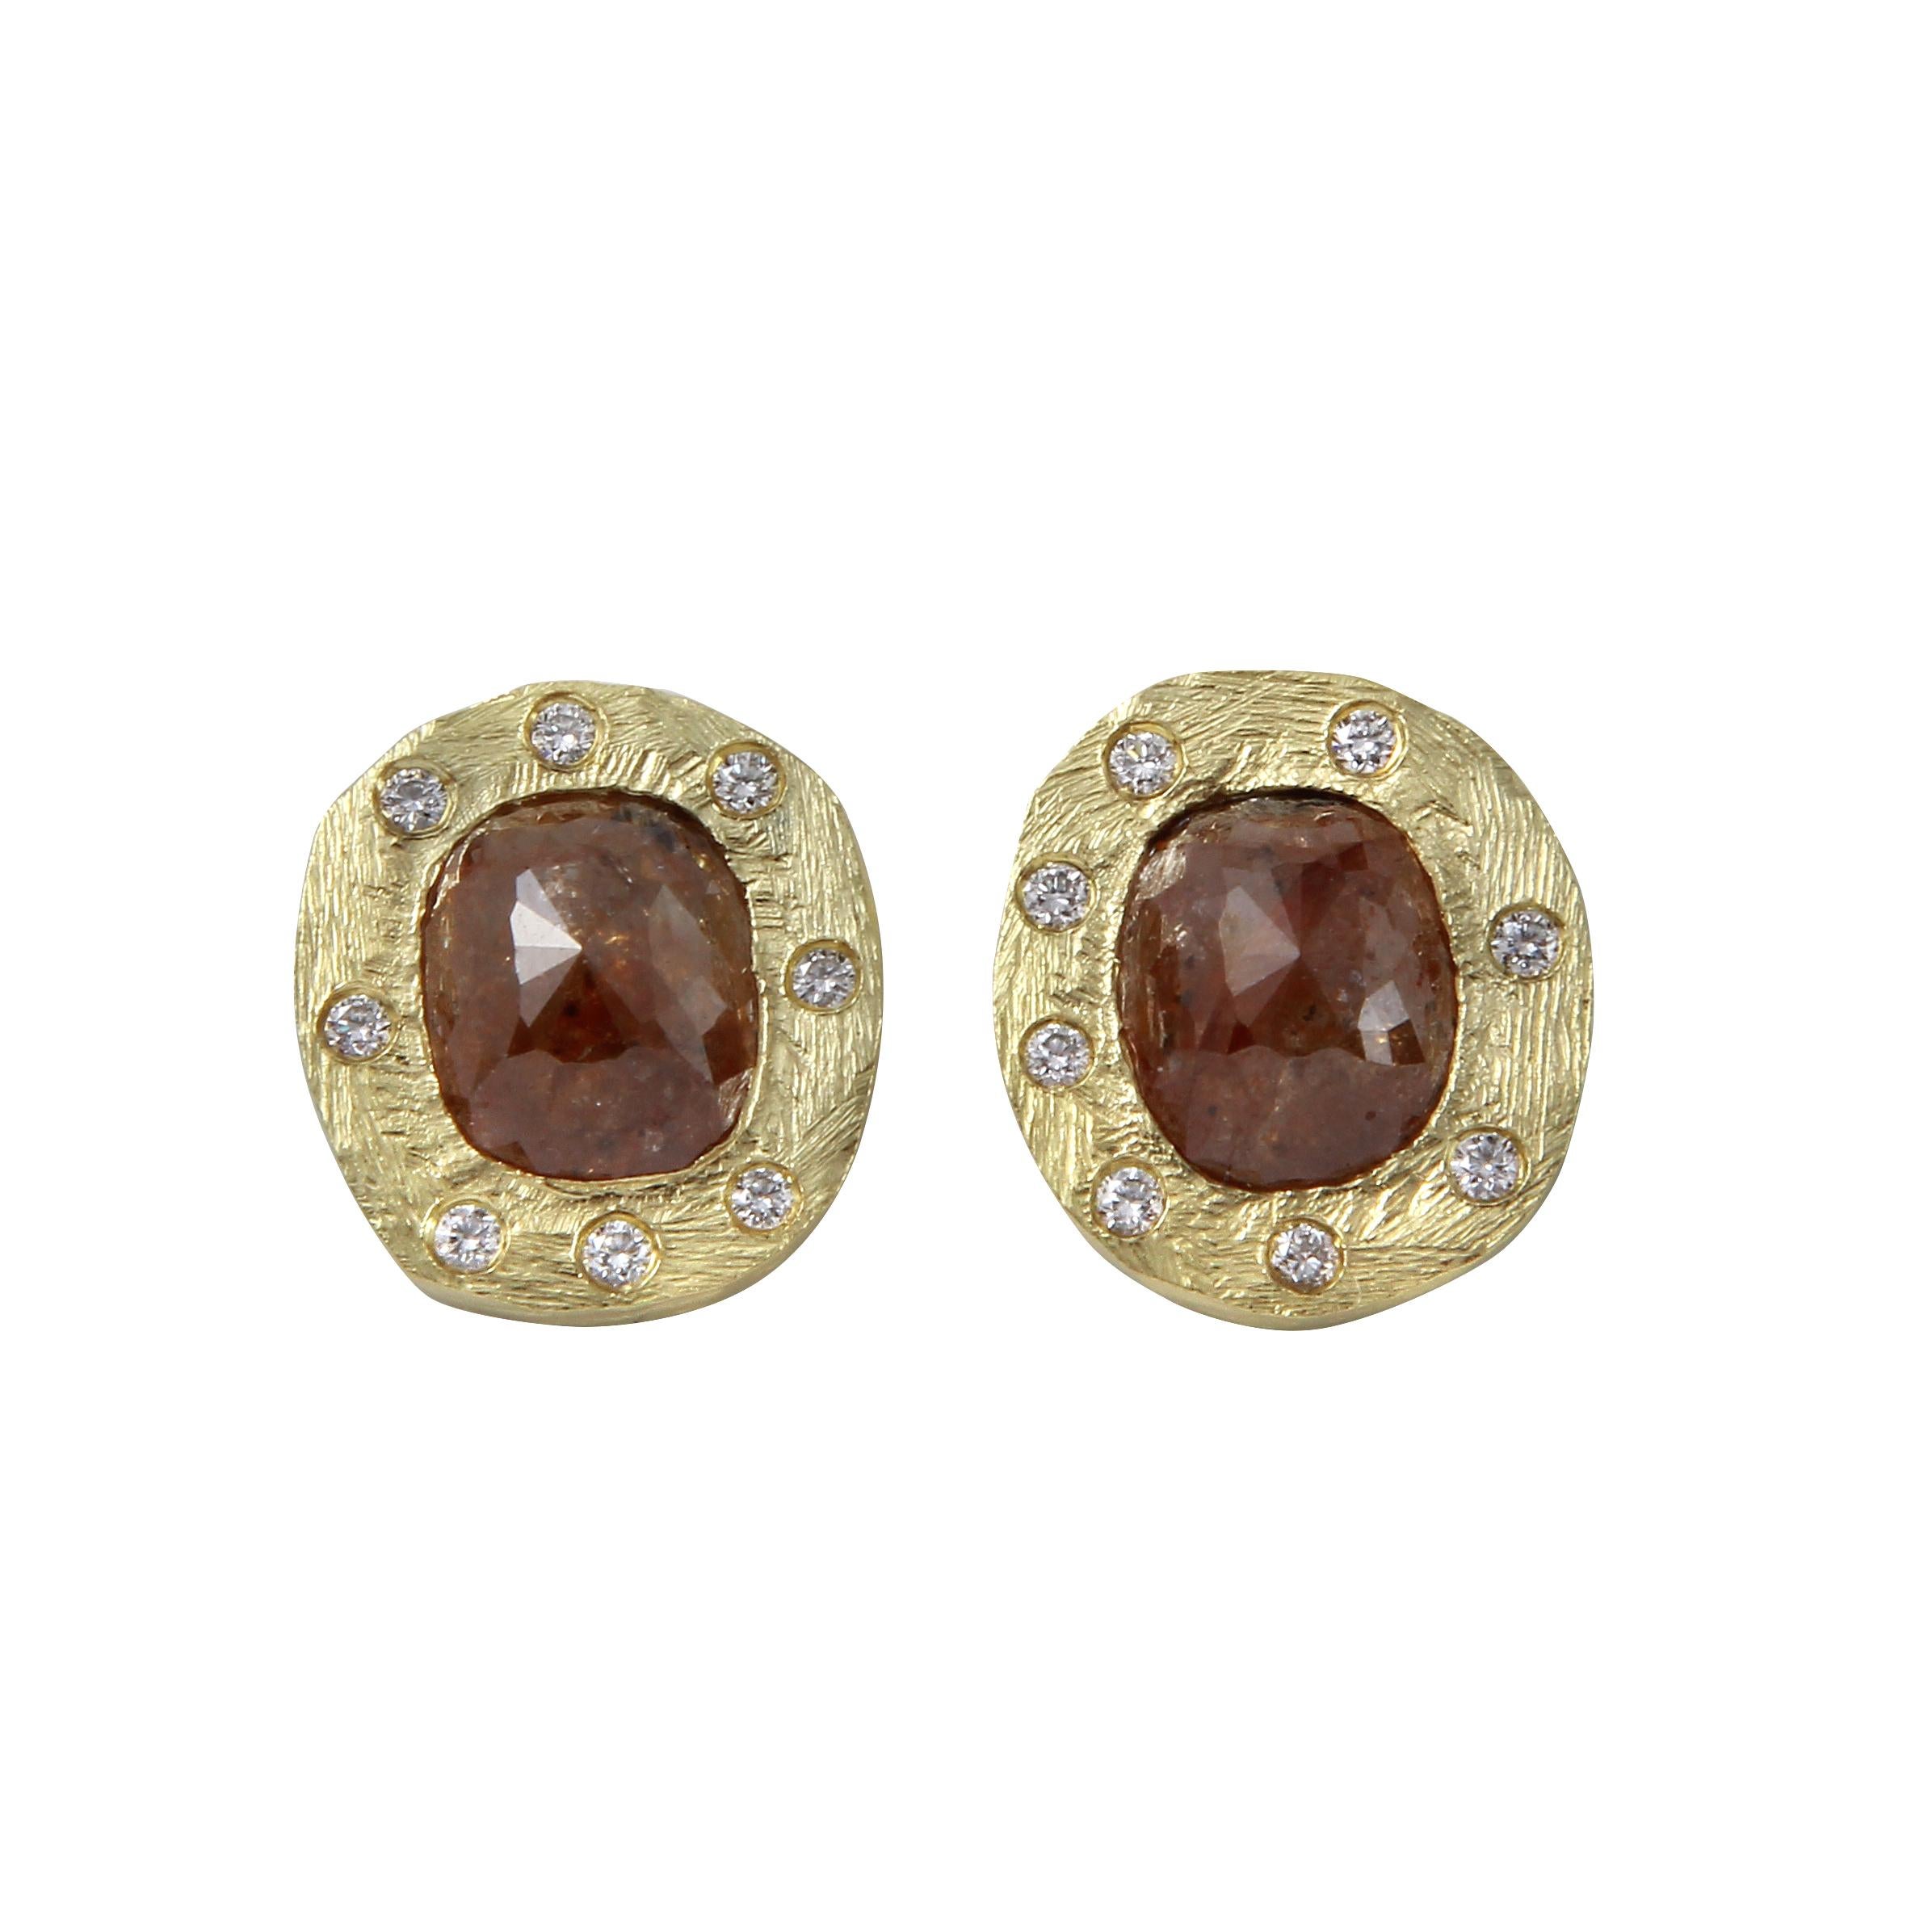 Natural Color Oval Rose cut and White Diamond  French Clip Studs in 18k Yellow Gold designed by Amyn The Jeweler.

Pair of large diamonds 11.12 cts.

 White  full cut diamonds 16 diamonds 0.32 cts. 

Total diamond weight 11.44 cts.

Passionately